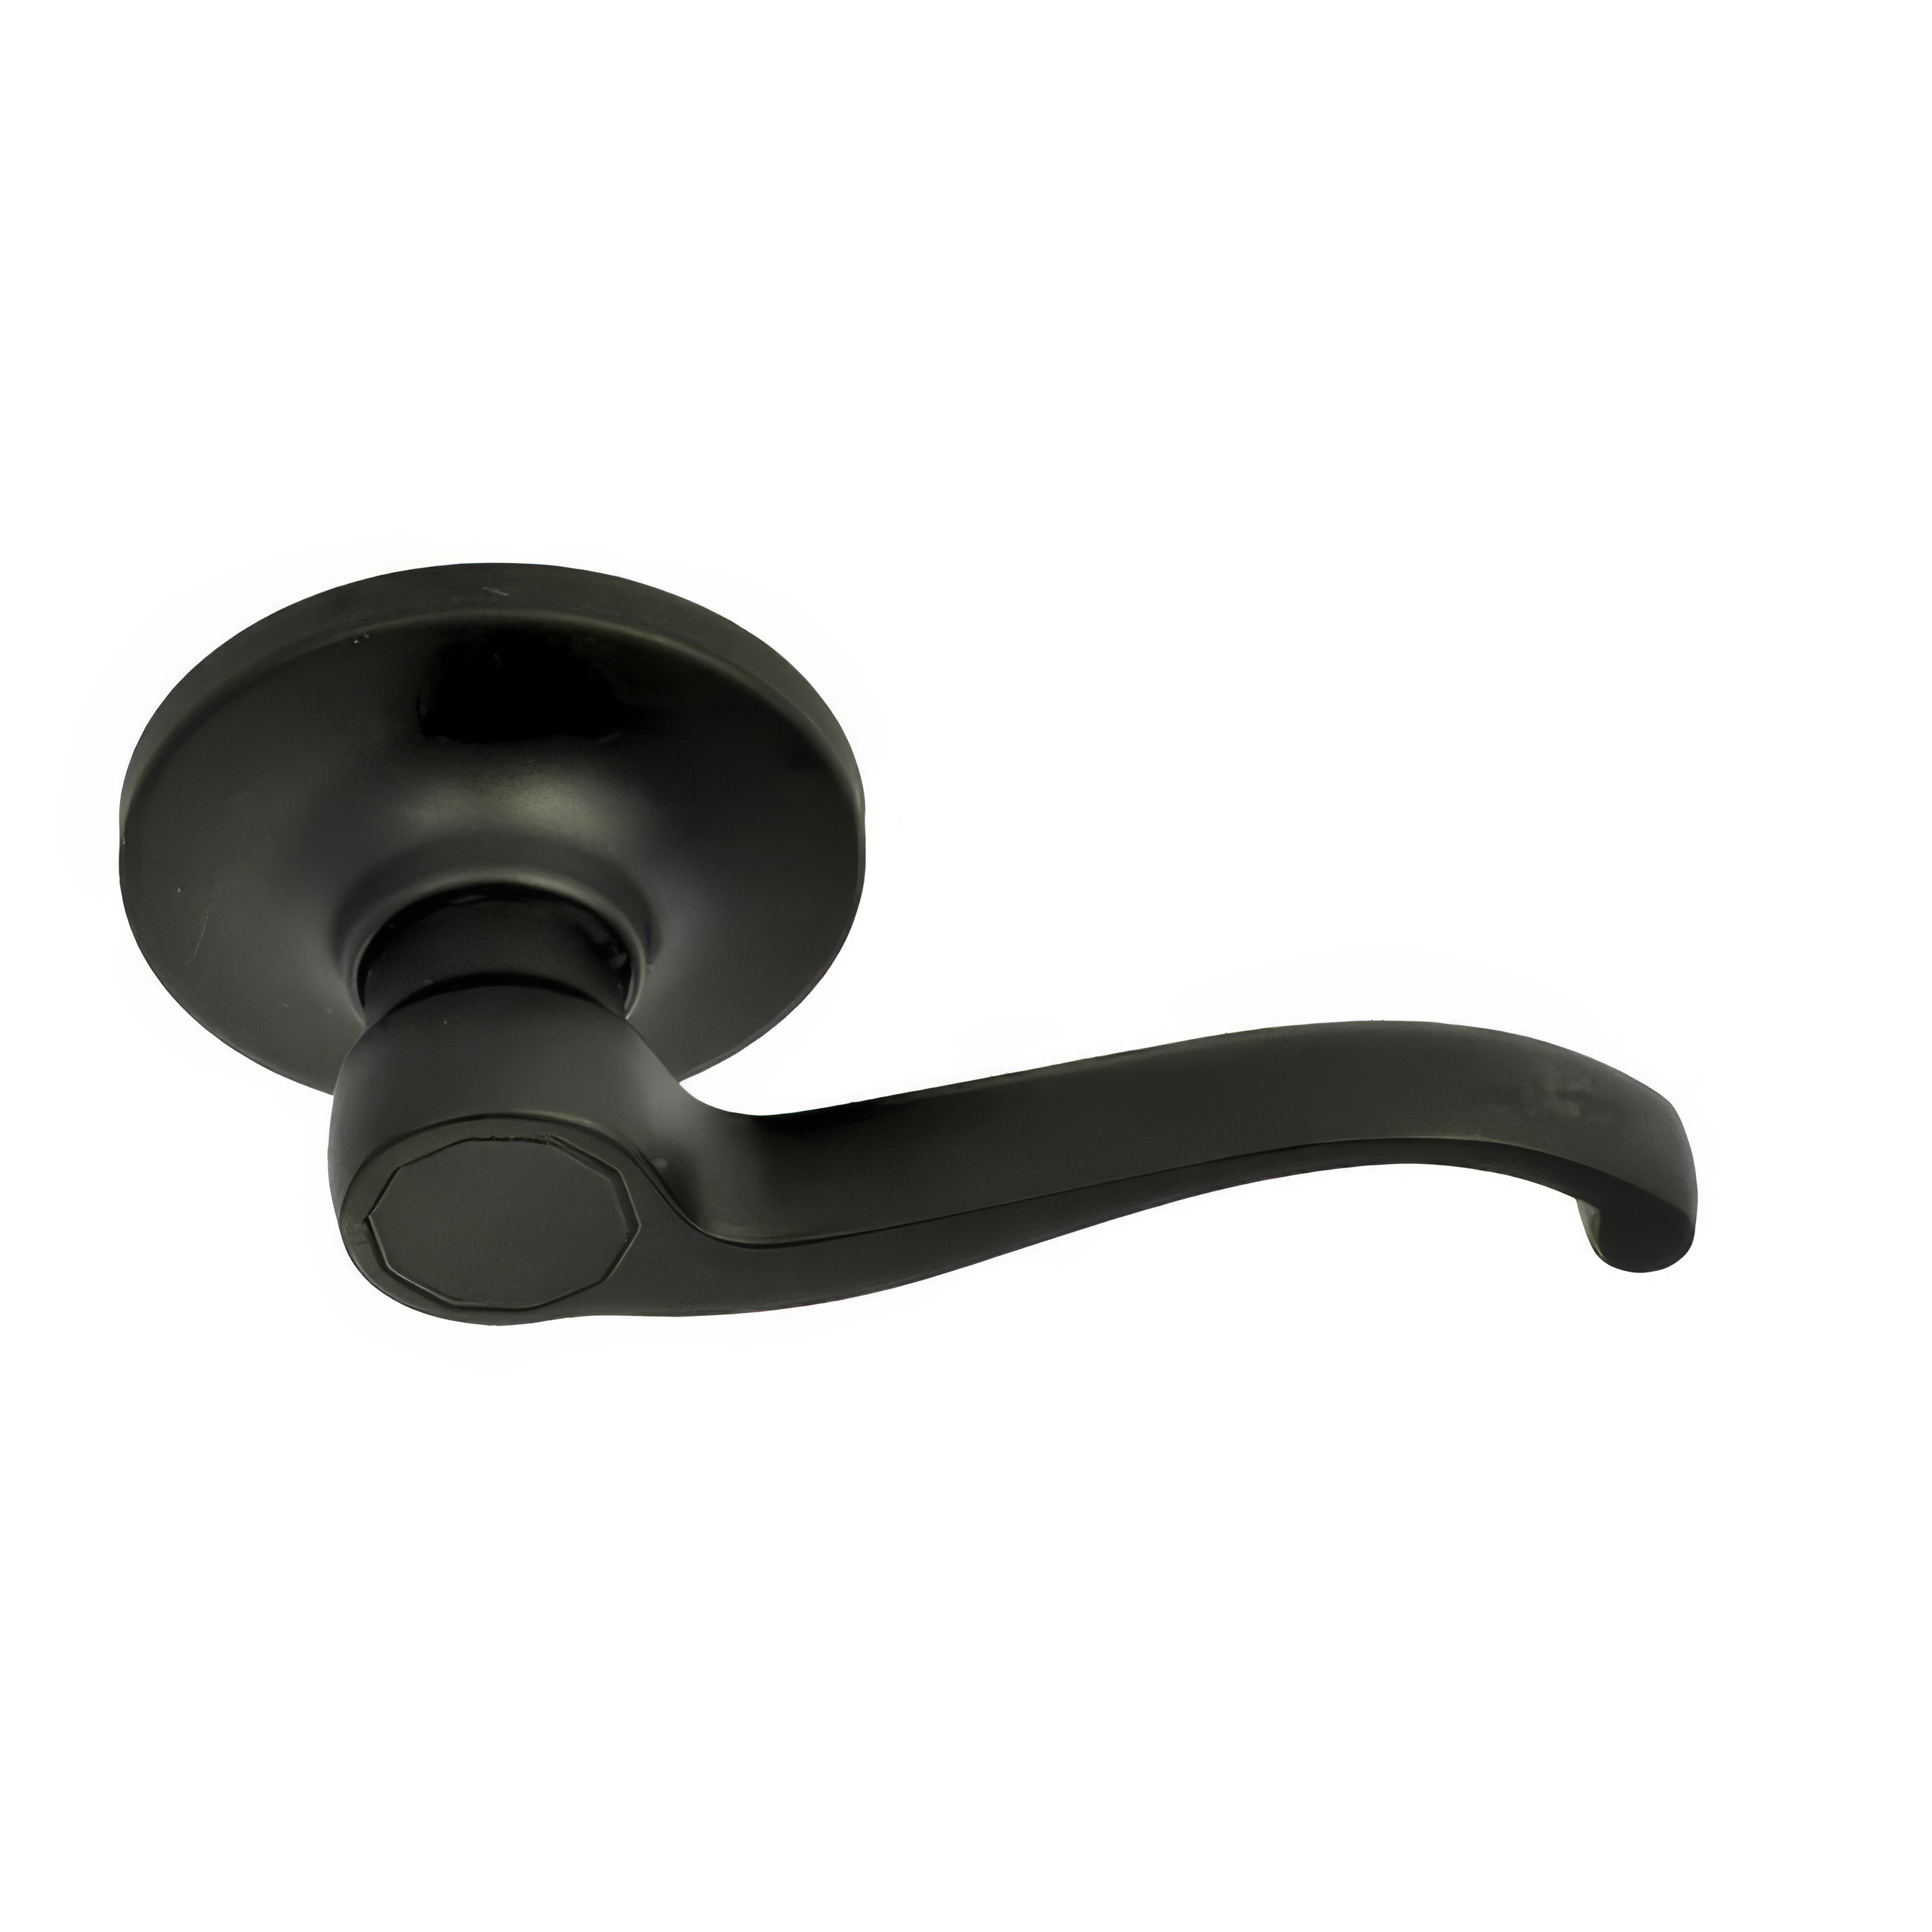 Better Home Products 14144BLK